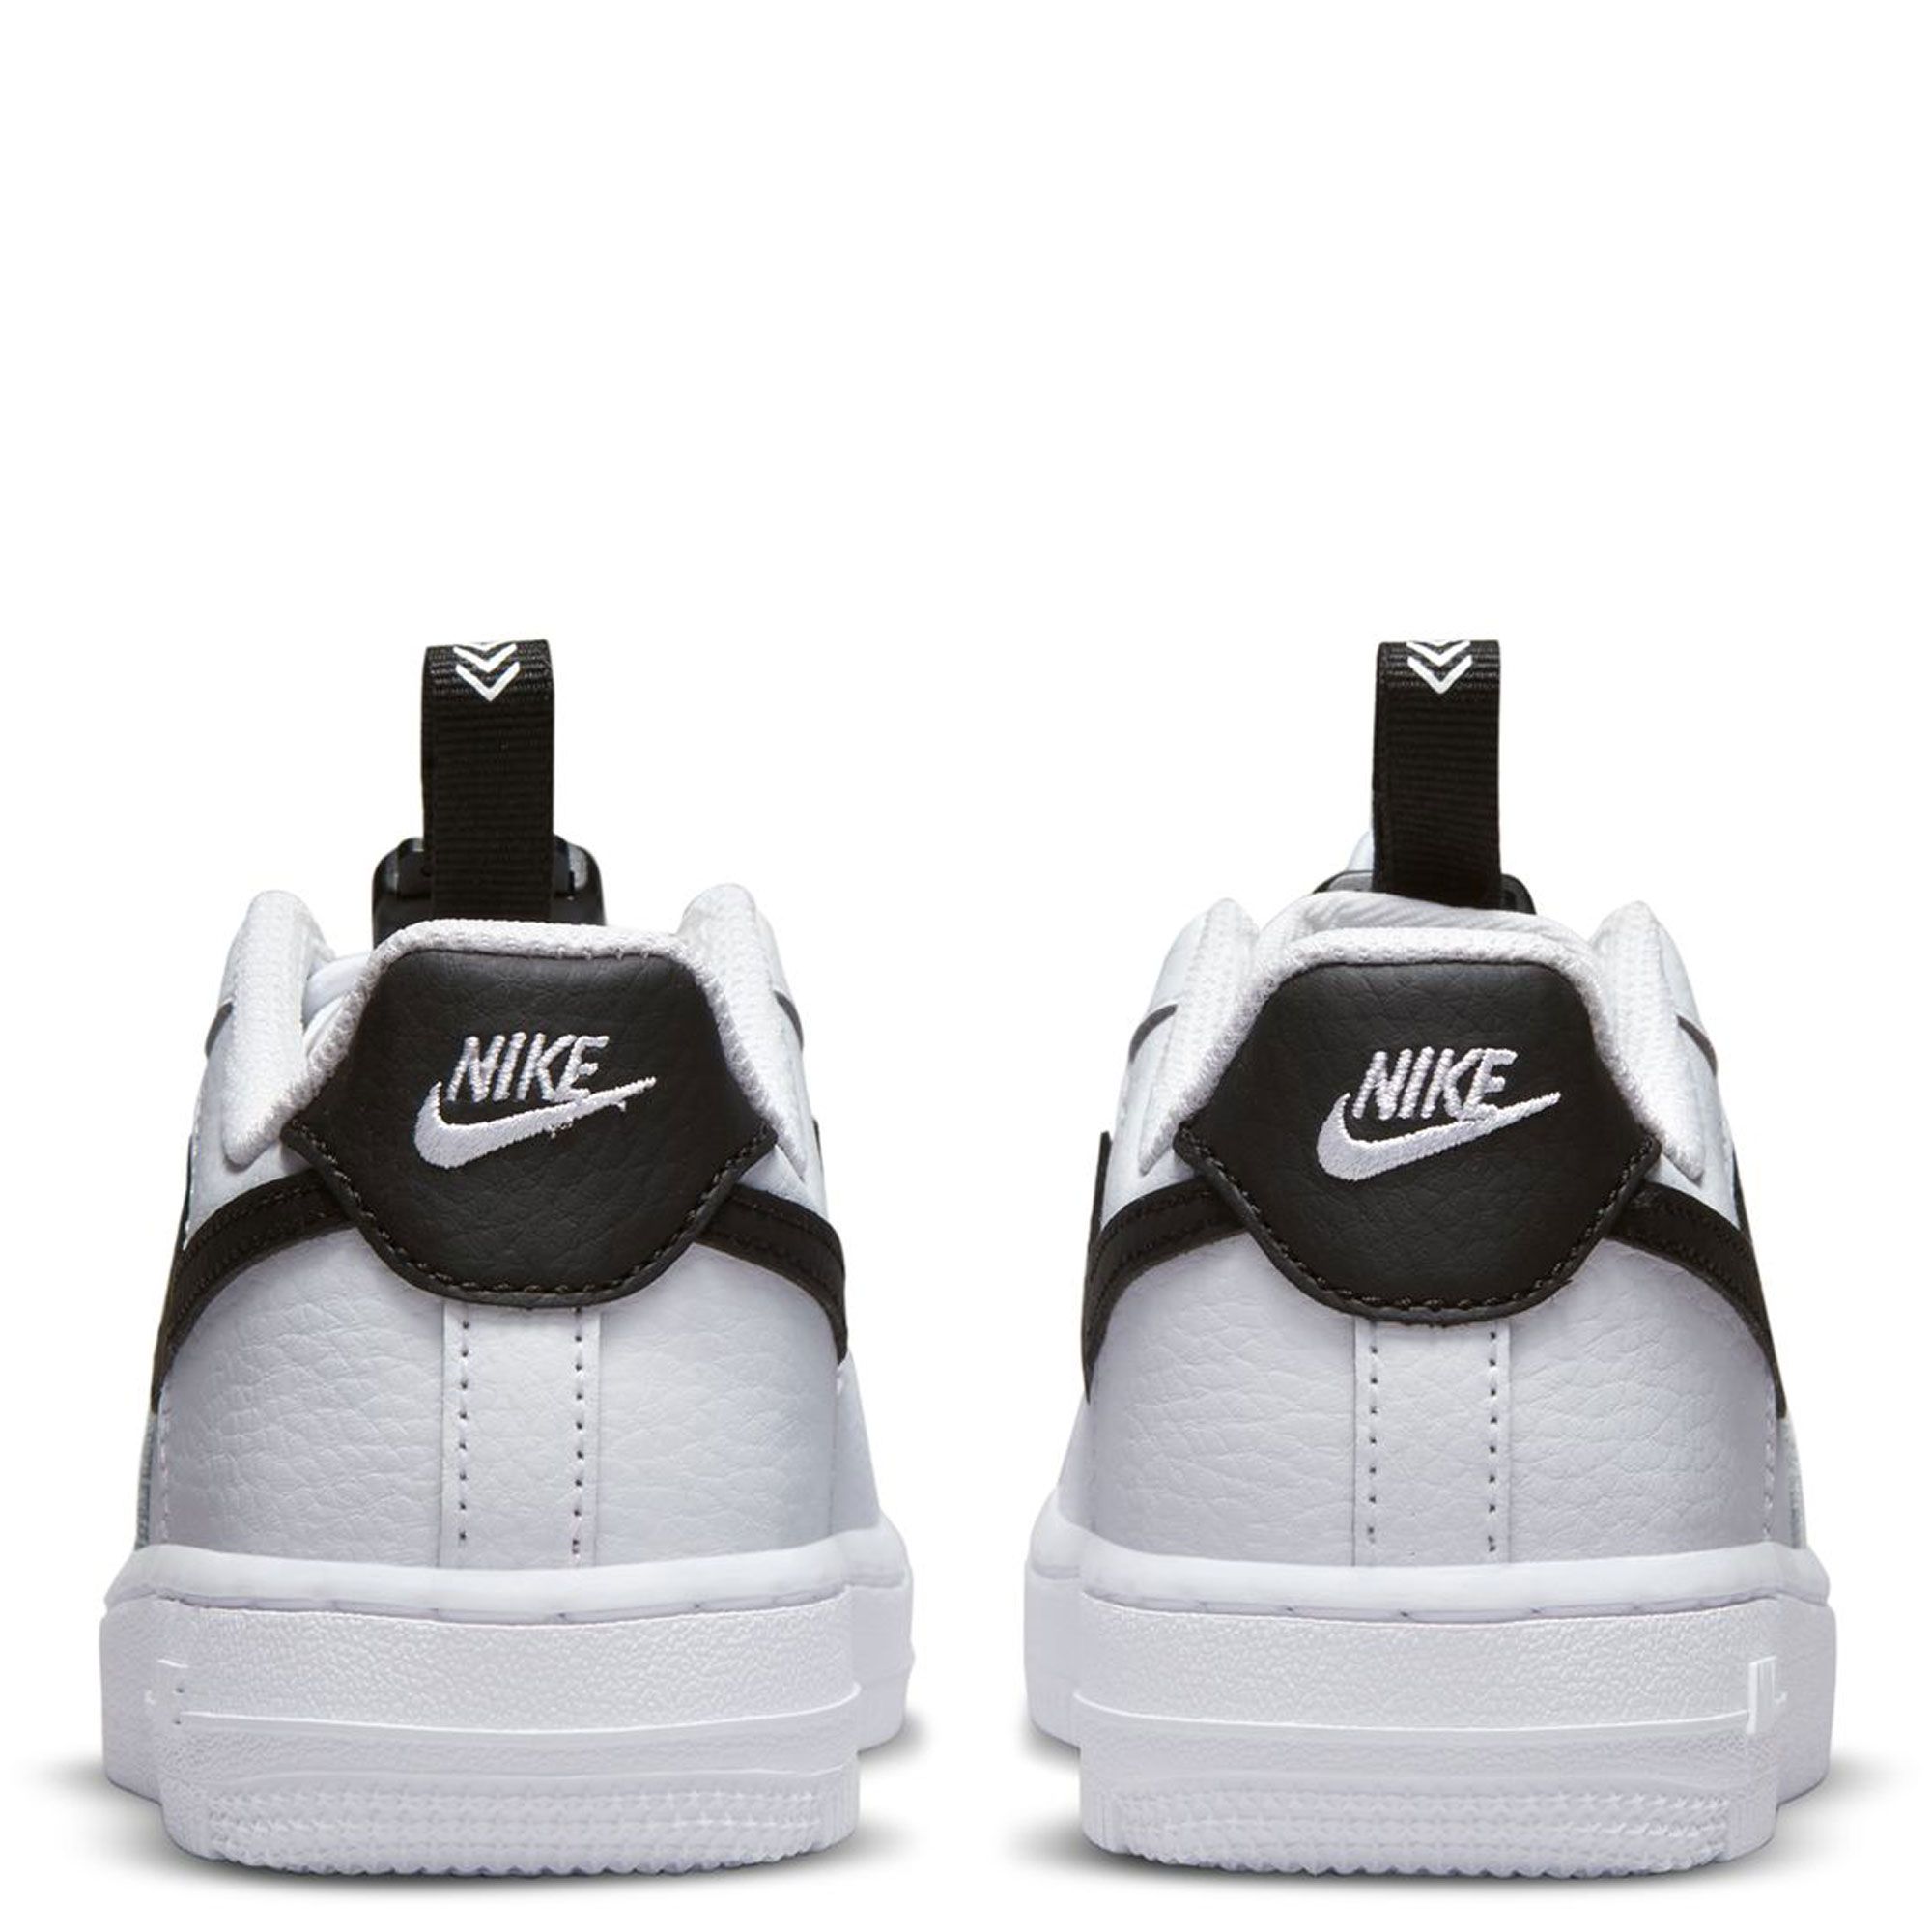 Nike Air Force 1 Low Utility PS by Nike of (White color) for only